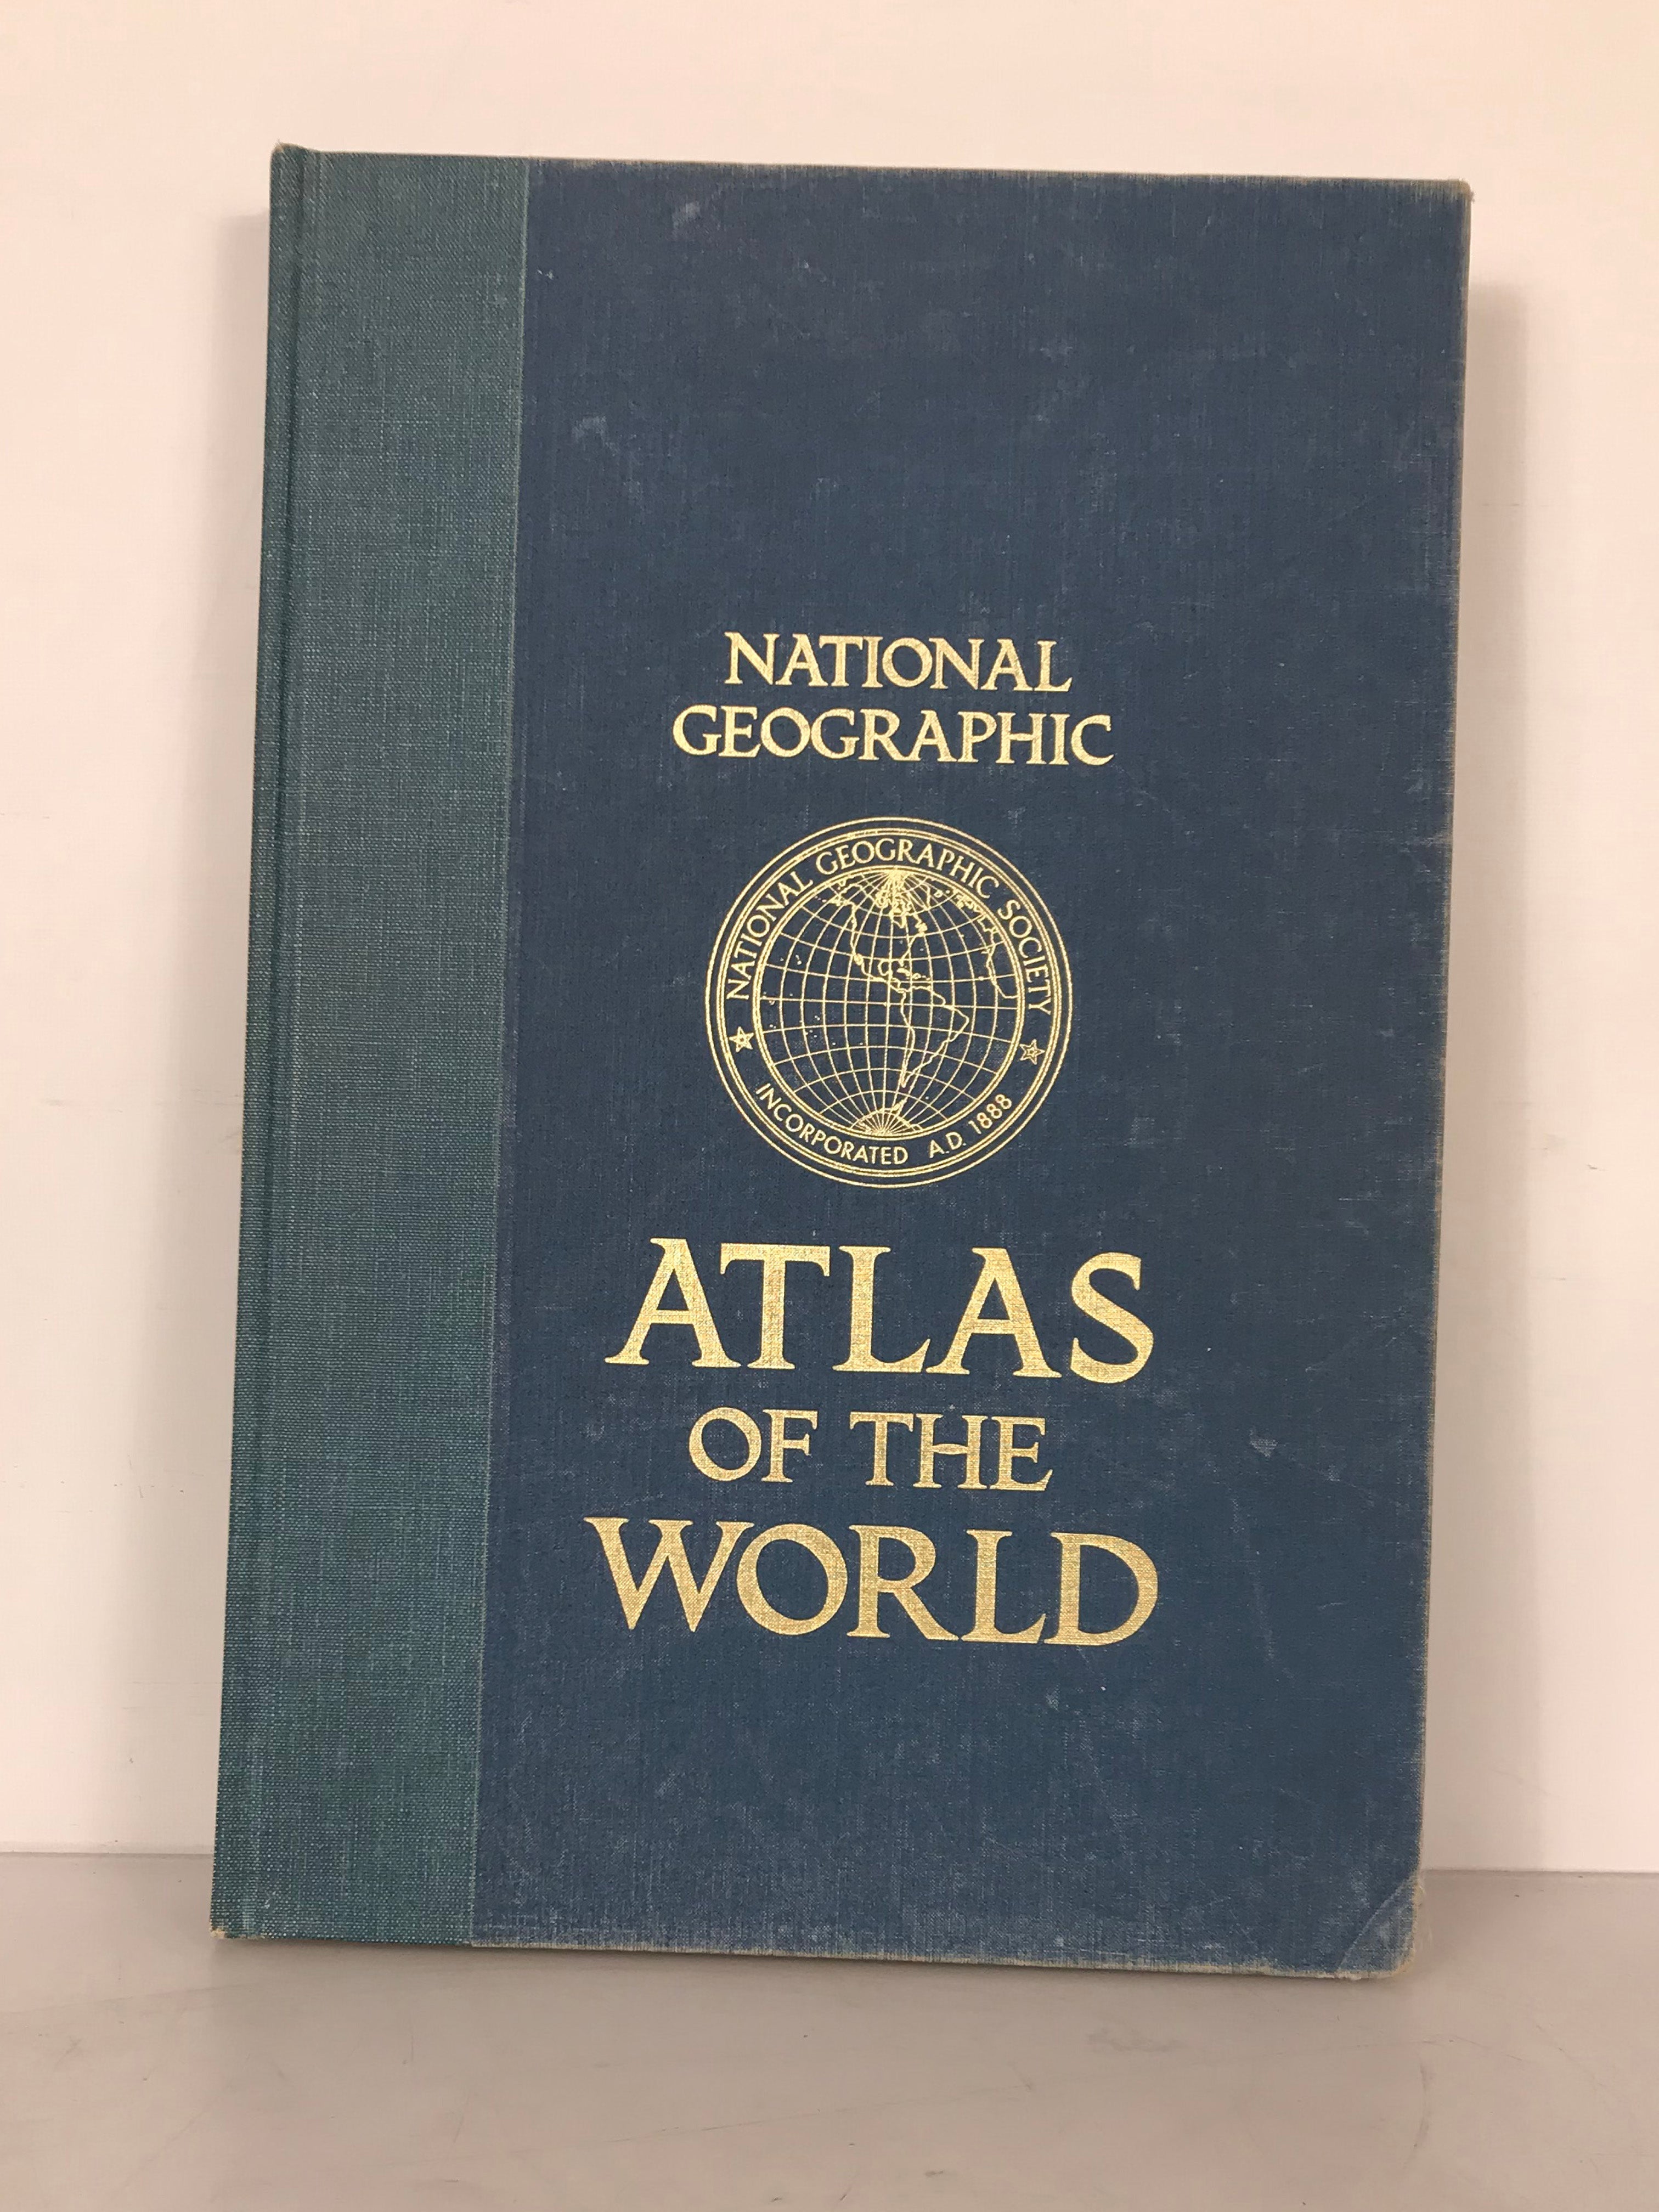 National Geographic Atlas of the World 5th Edition 1981